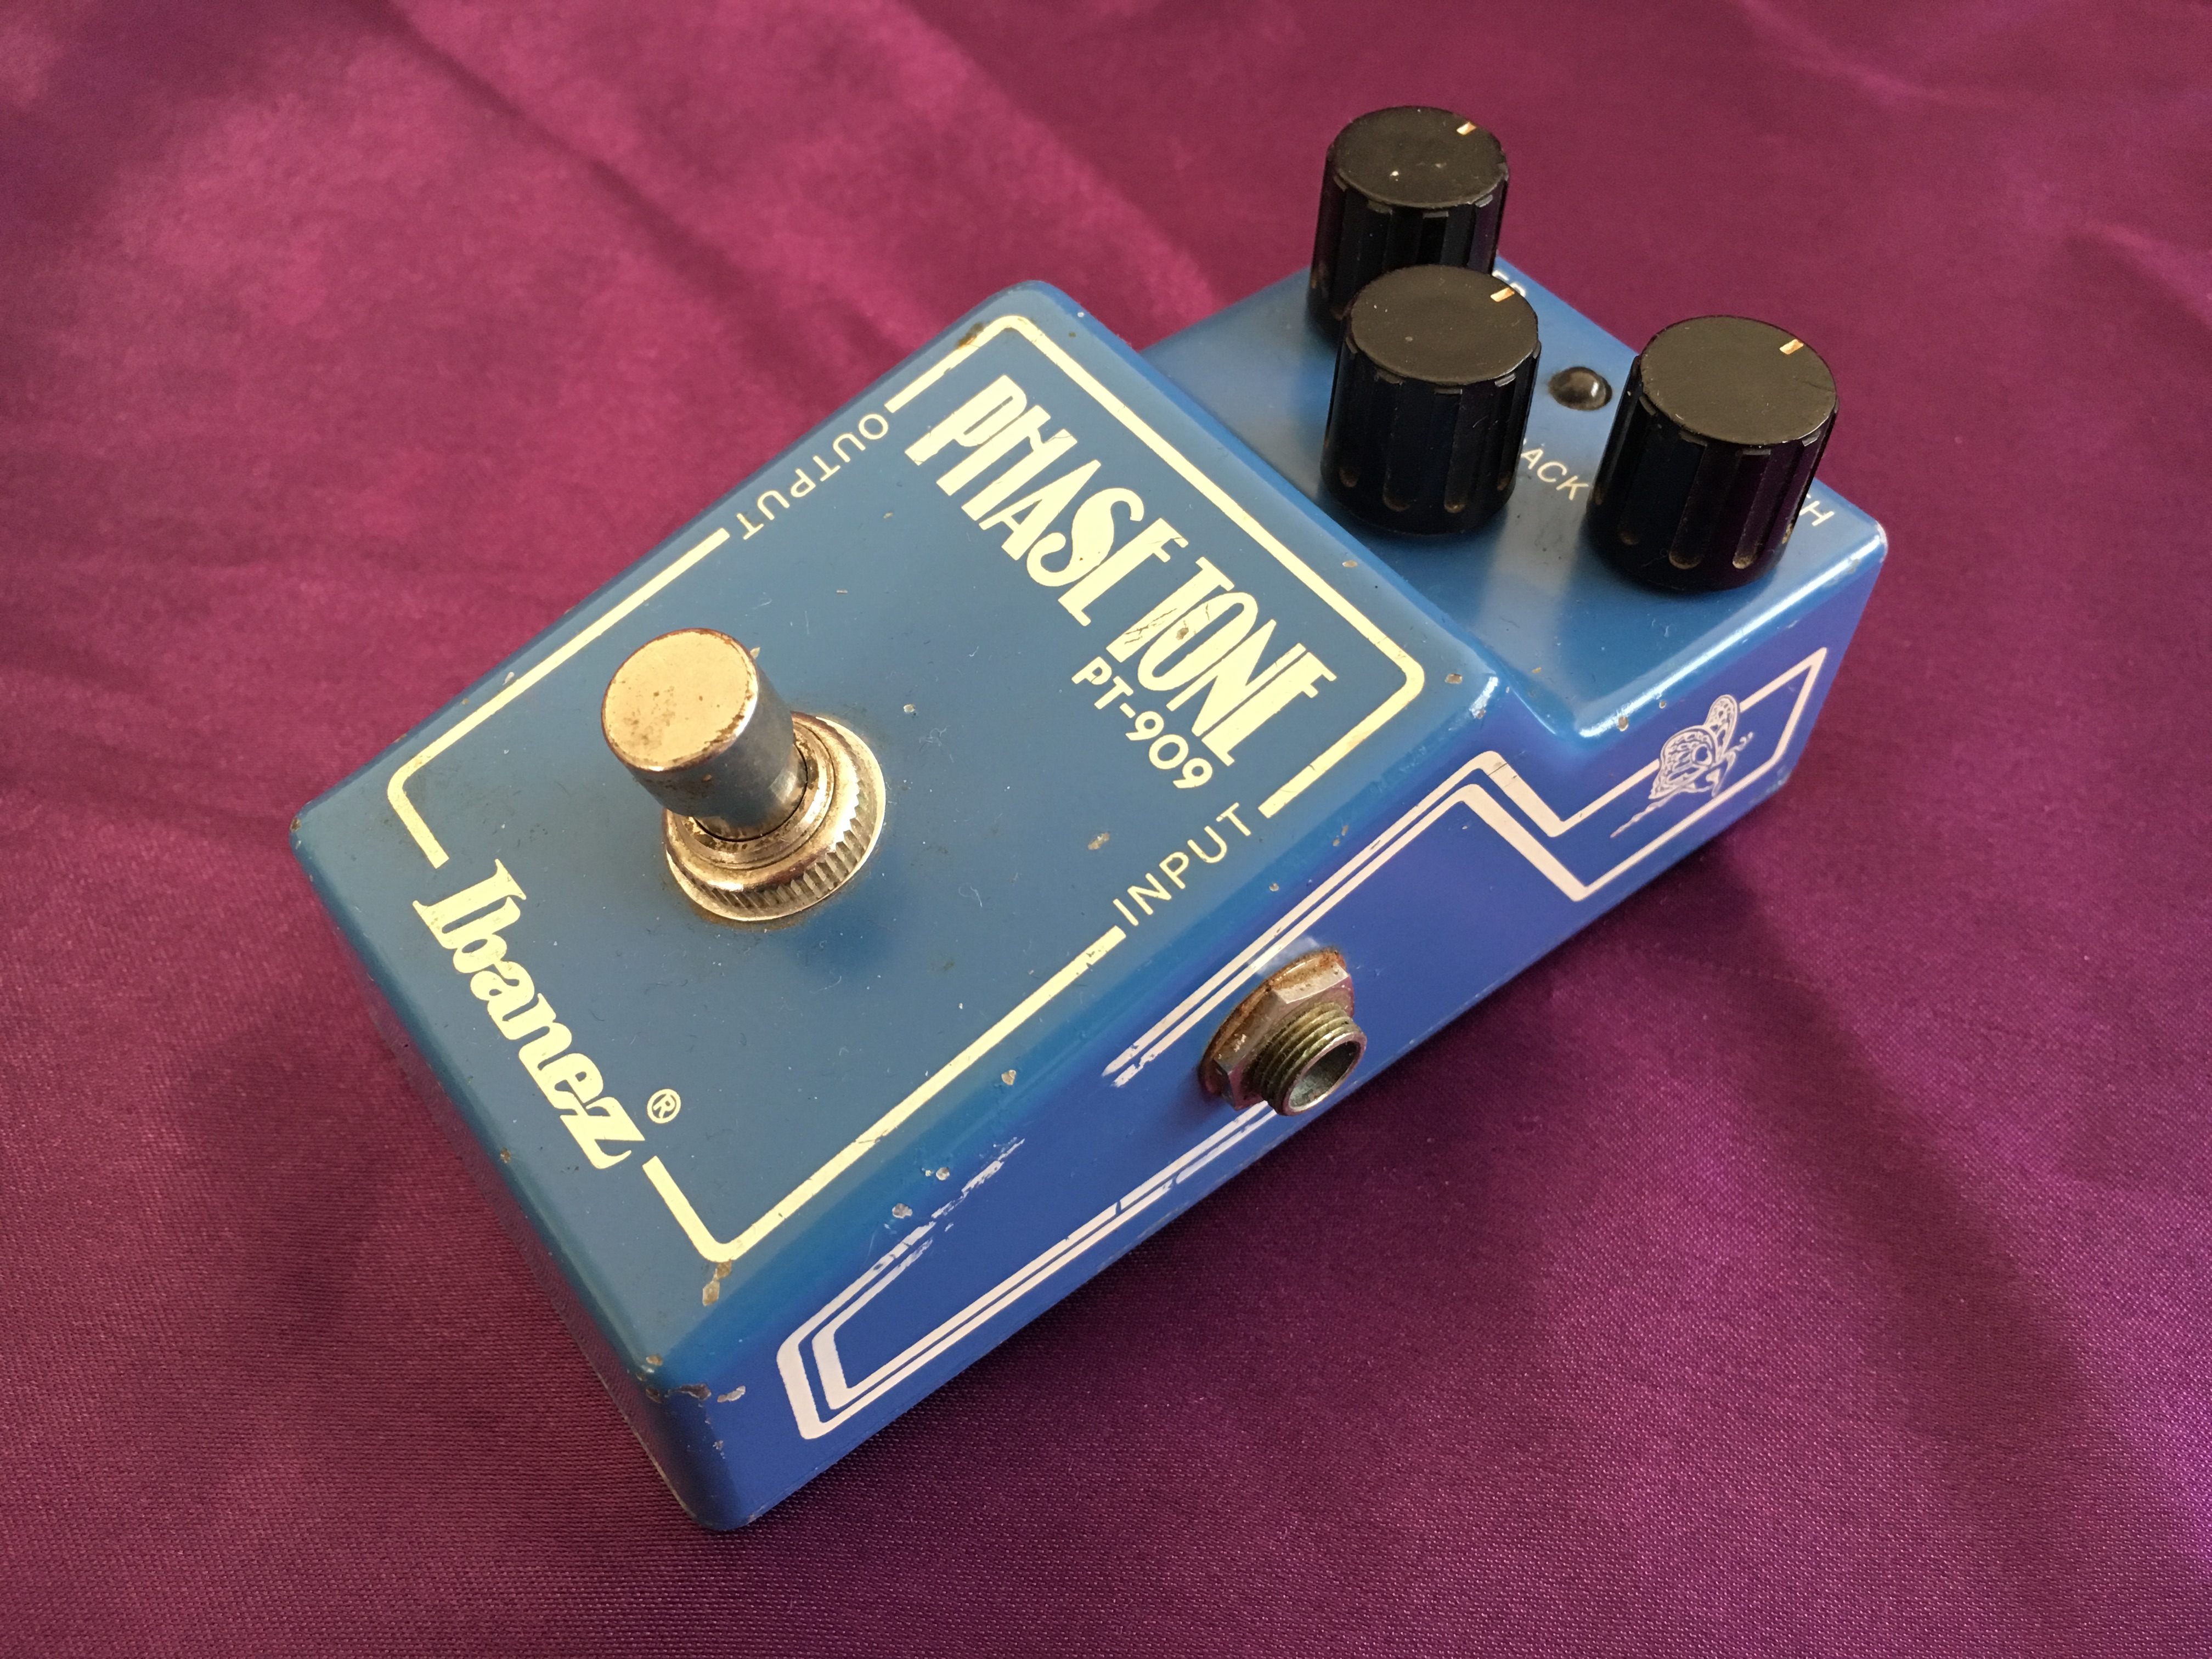 Feature – 1978/79 Ibanez PT-909 Phase Tone